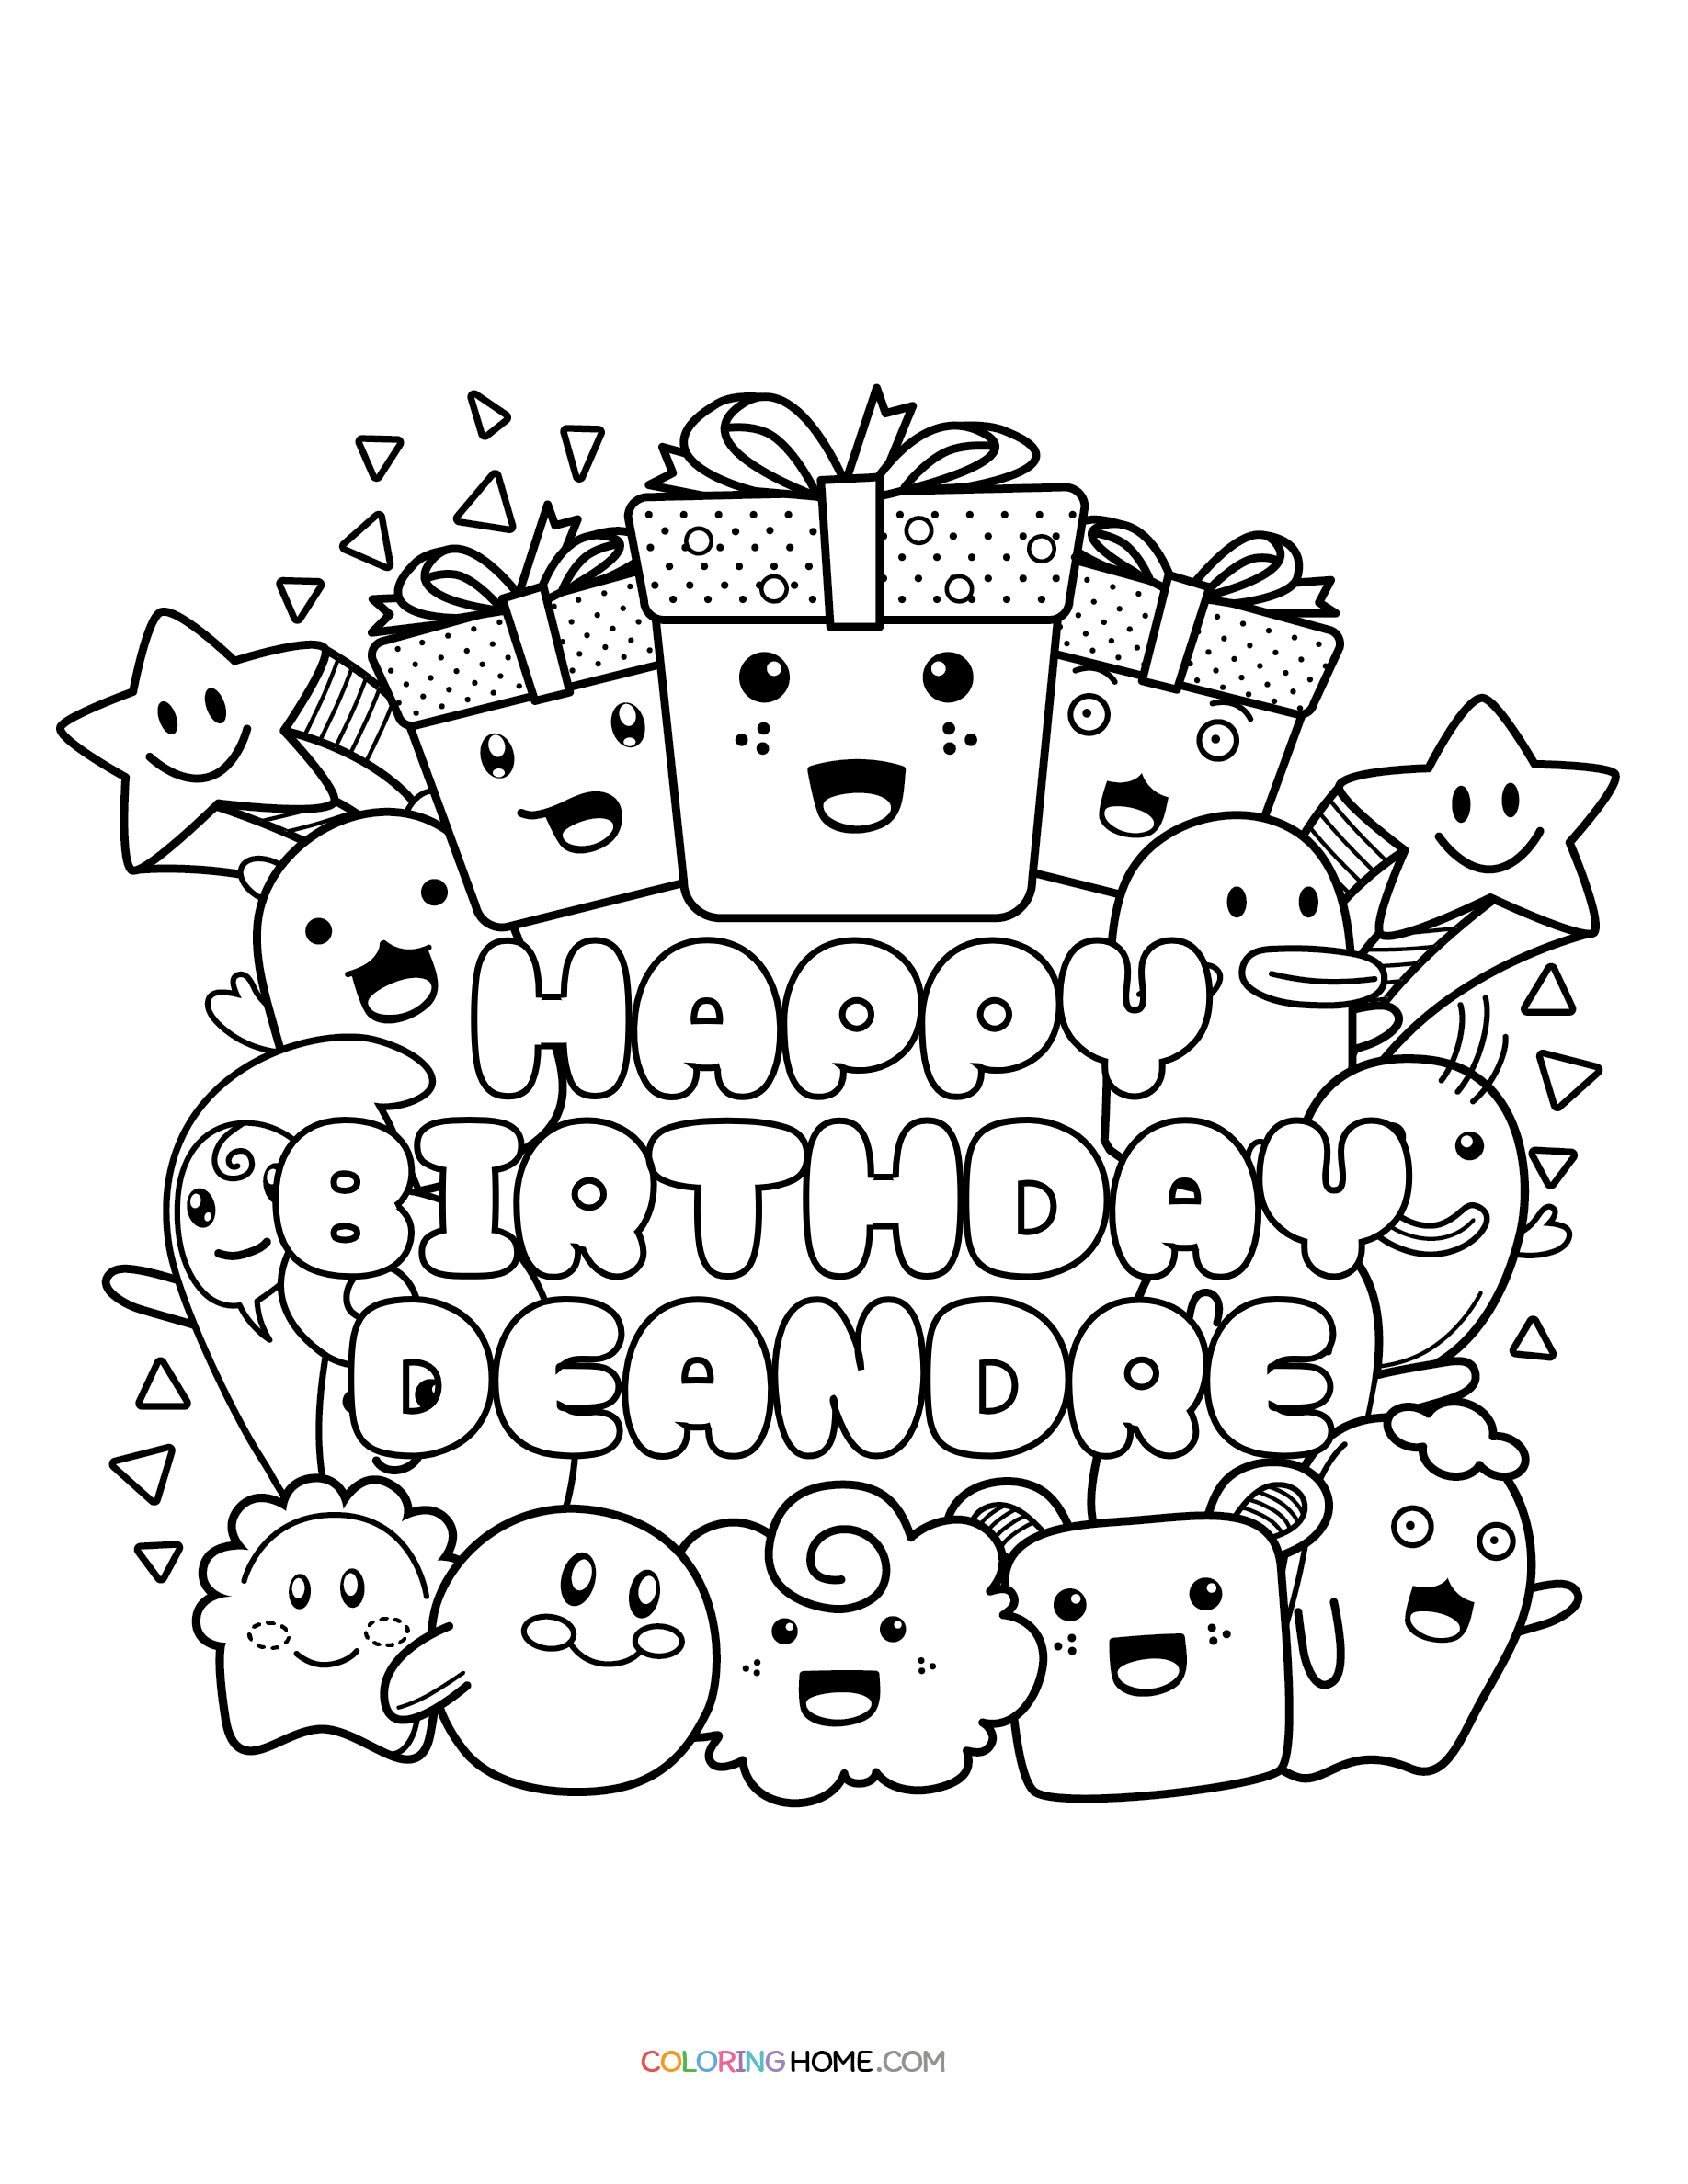 Happy Birthday Deandre coloring page